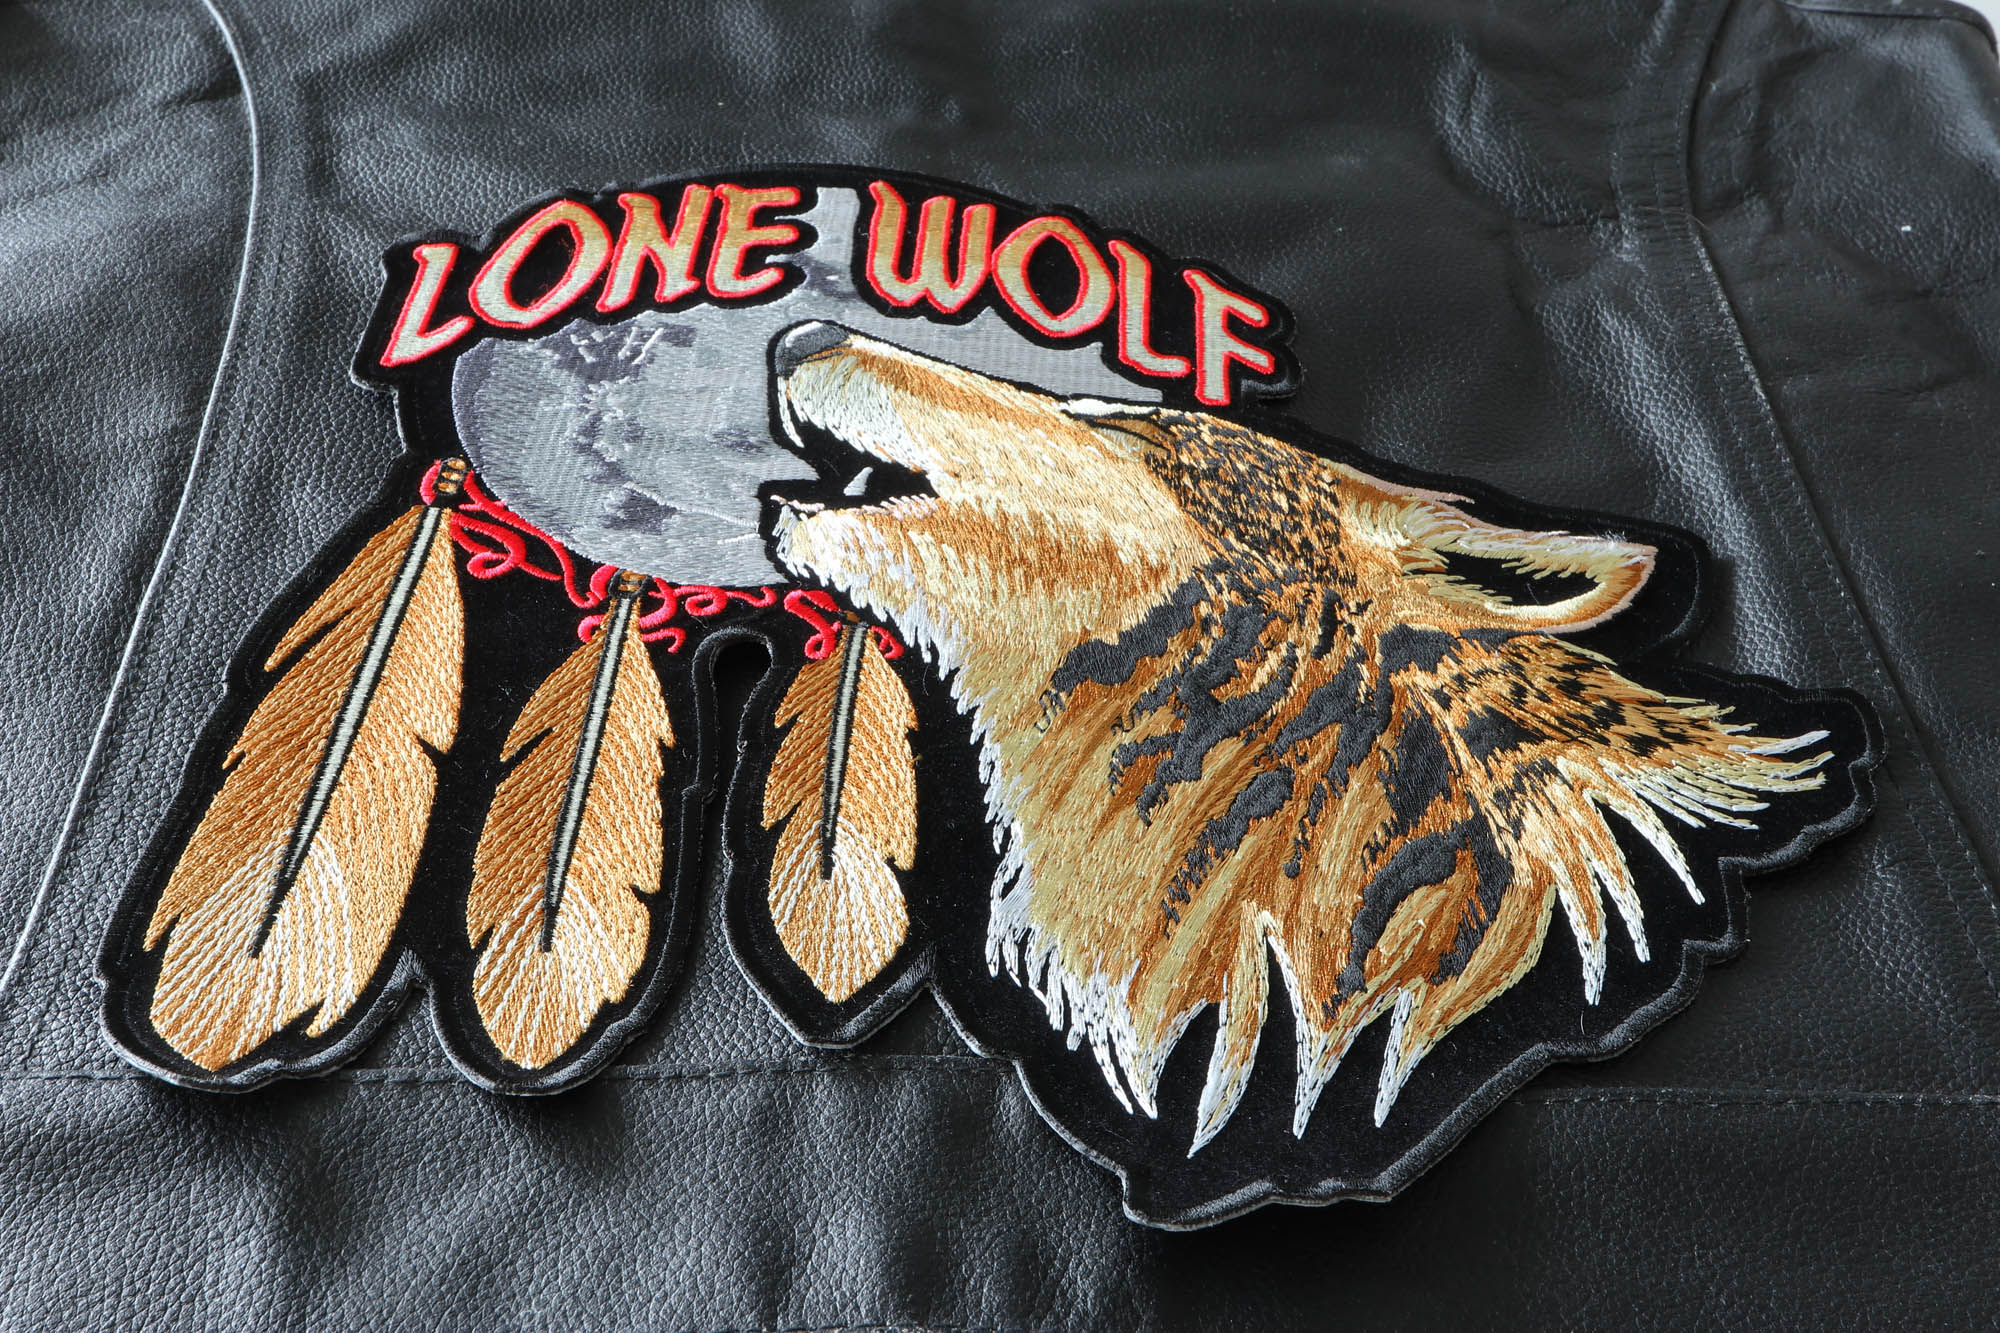 Lone Wolf Patch, Large Back Patches for Jackets and Vests